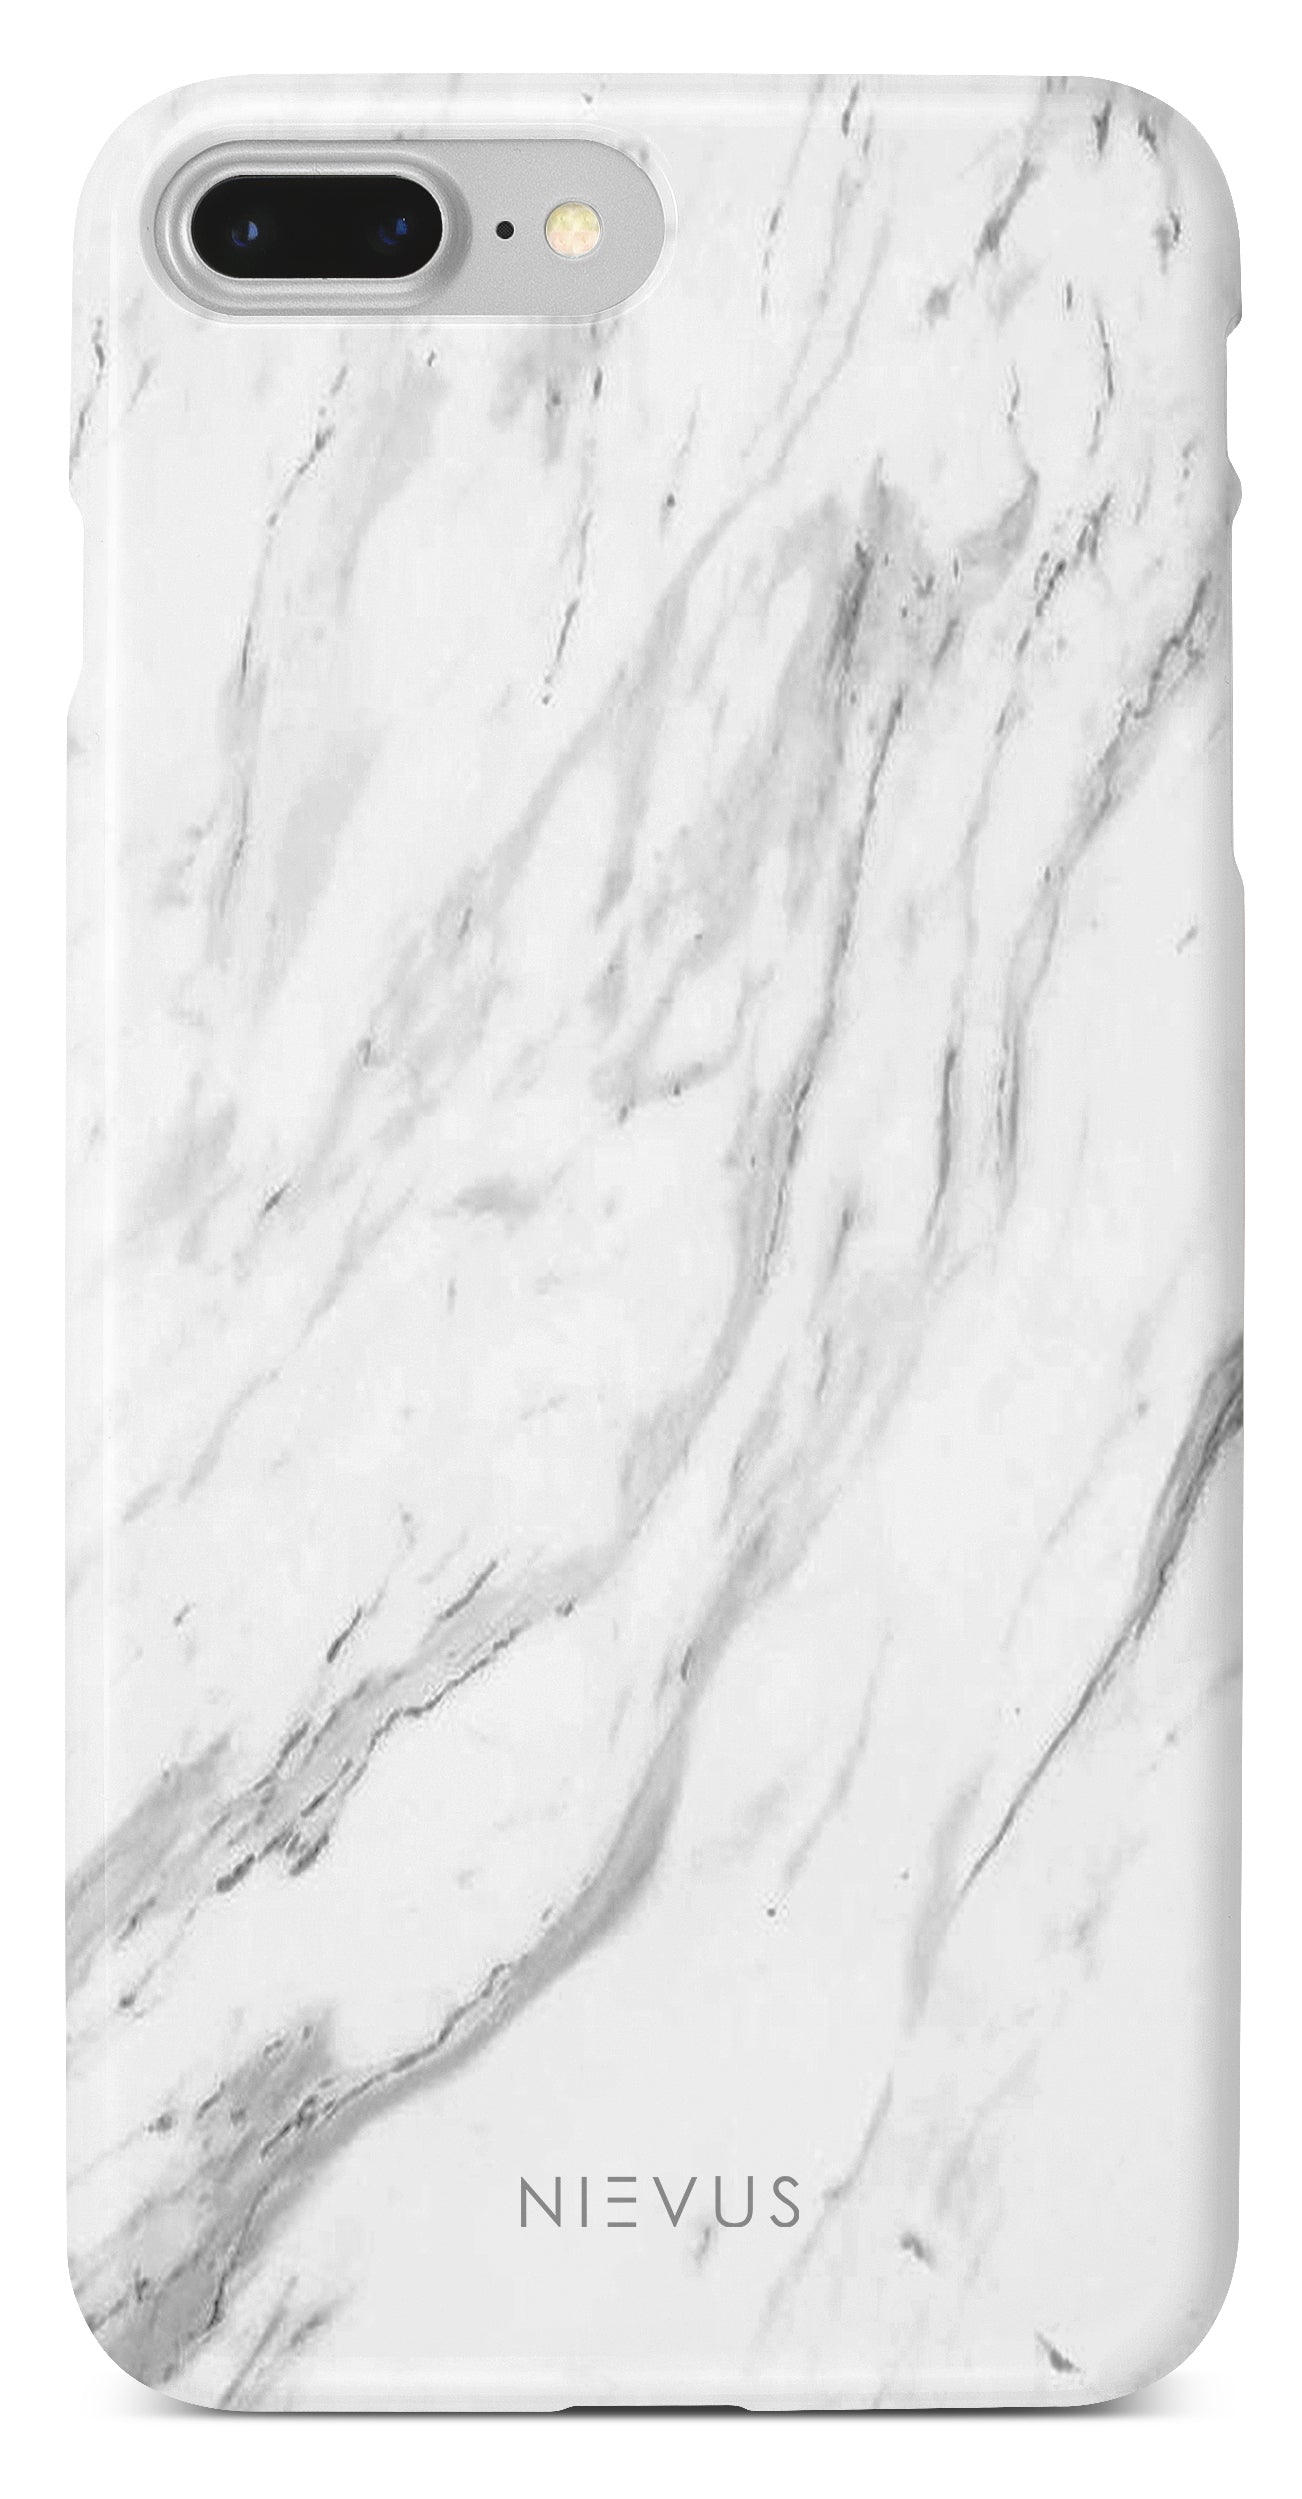 The Smooth Marble Case